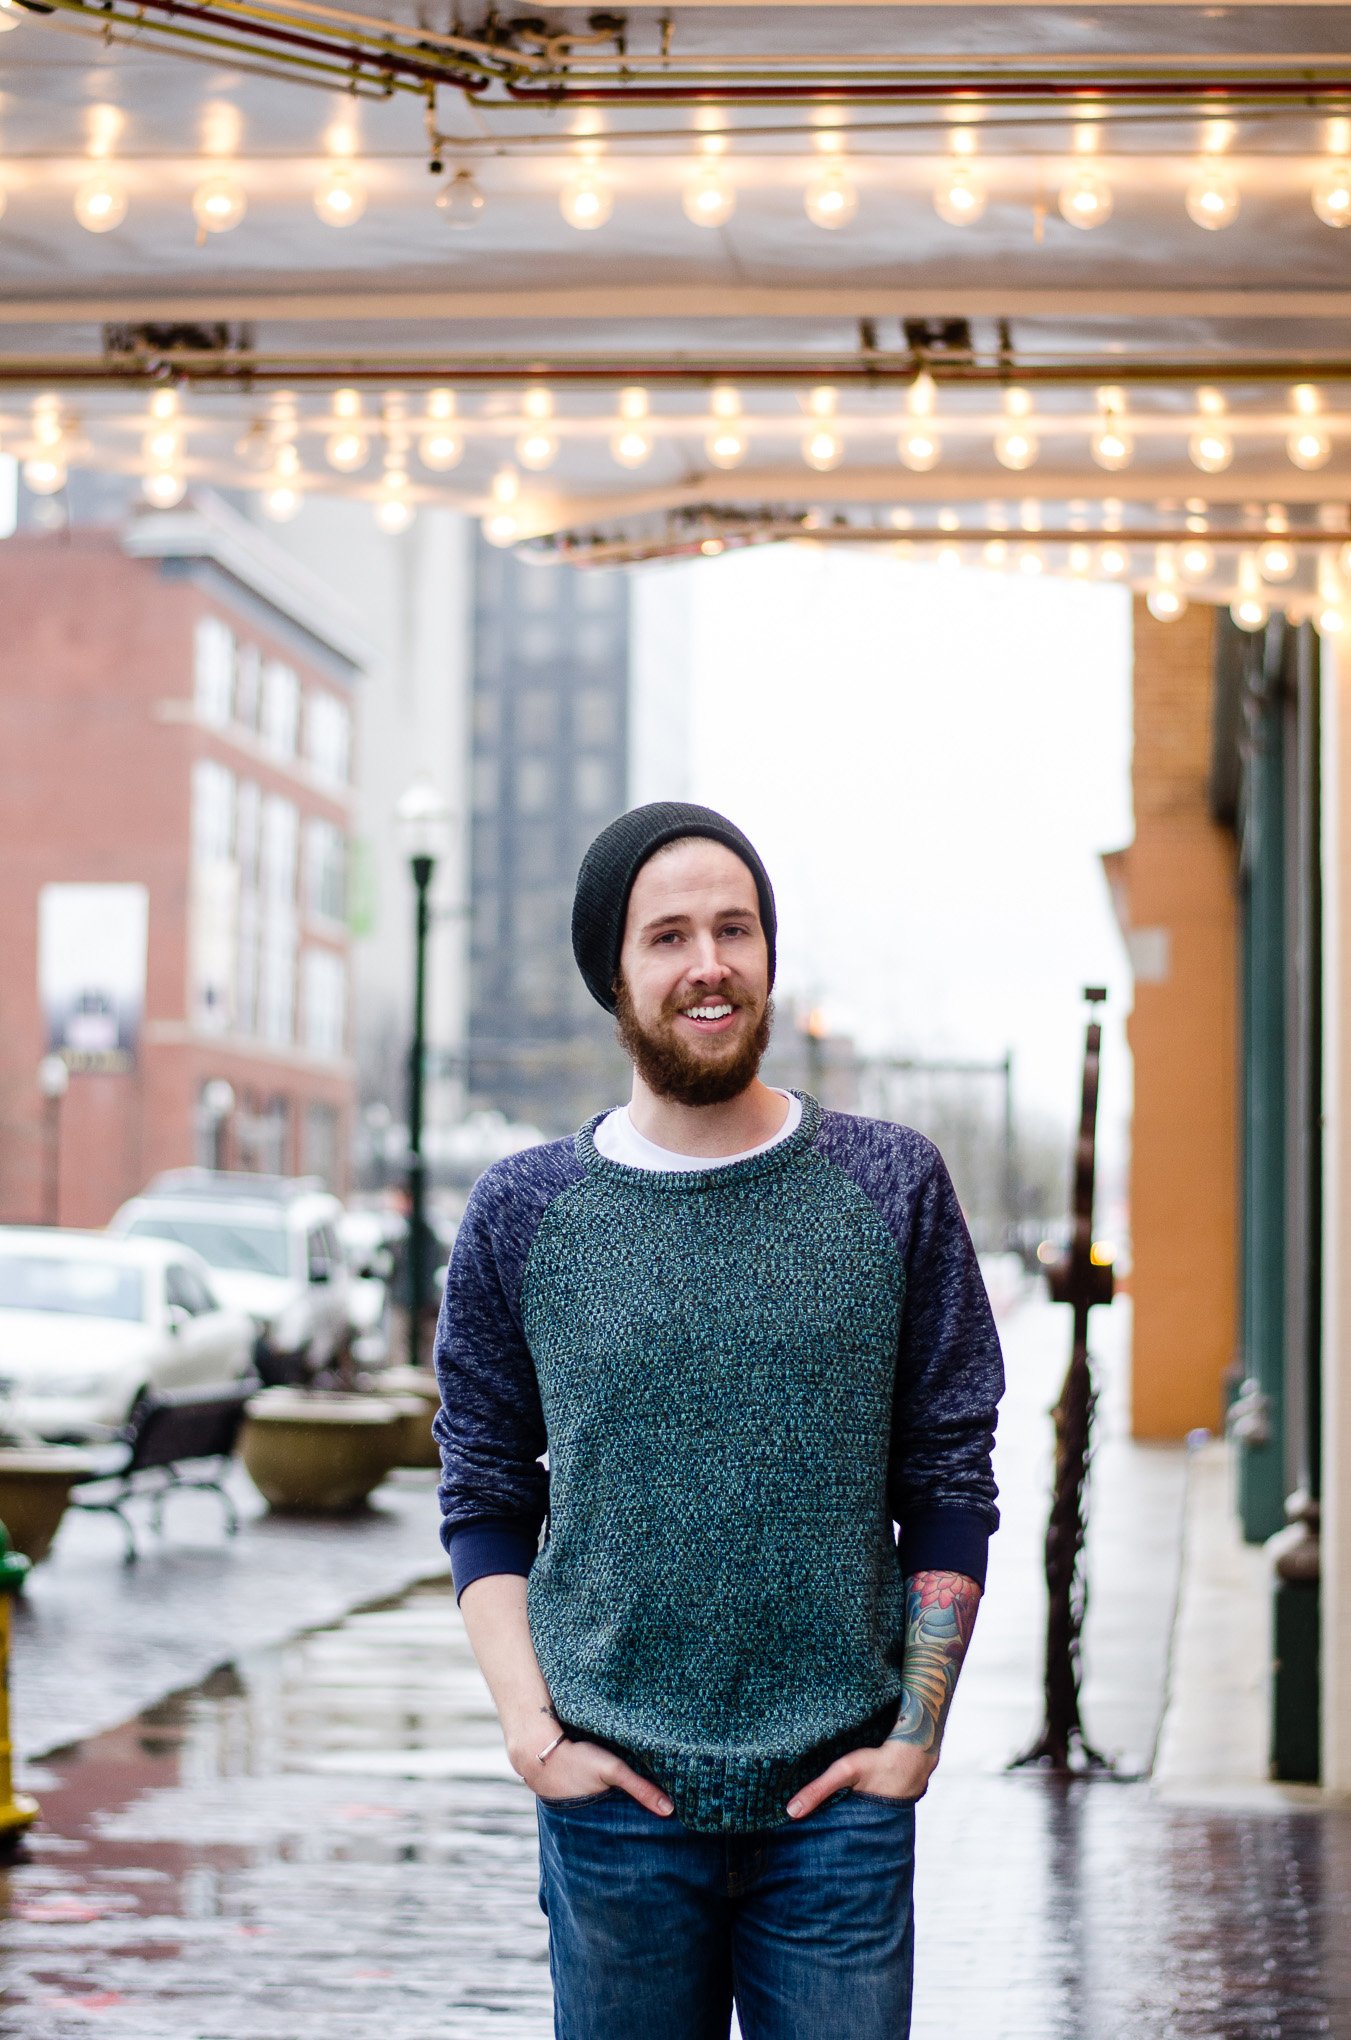 The Kentucky Gent, a men's fashion and lifestyle blogger, shares his growing pains as blogger.